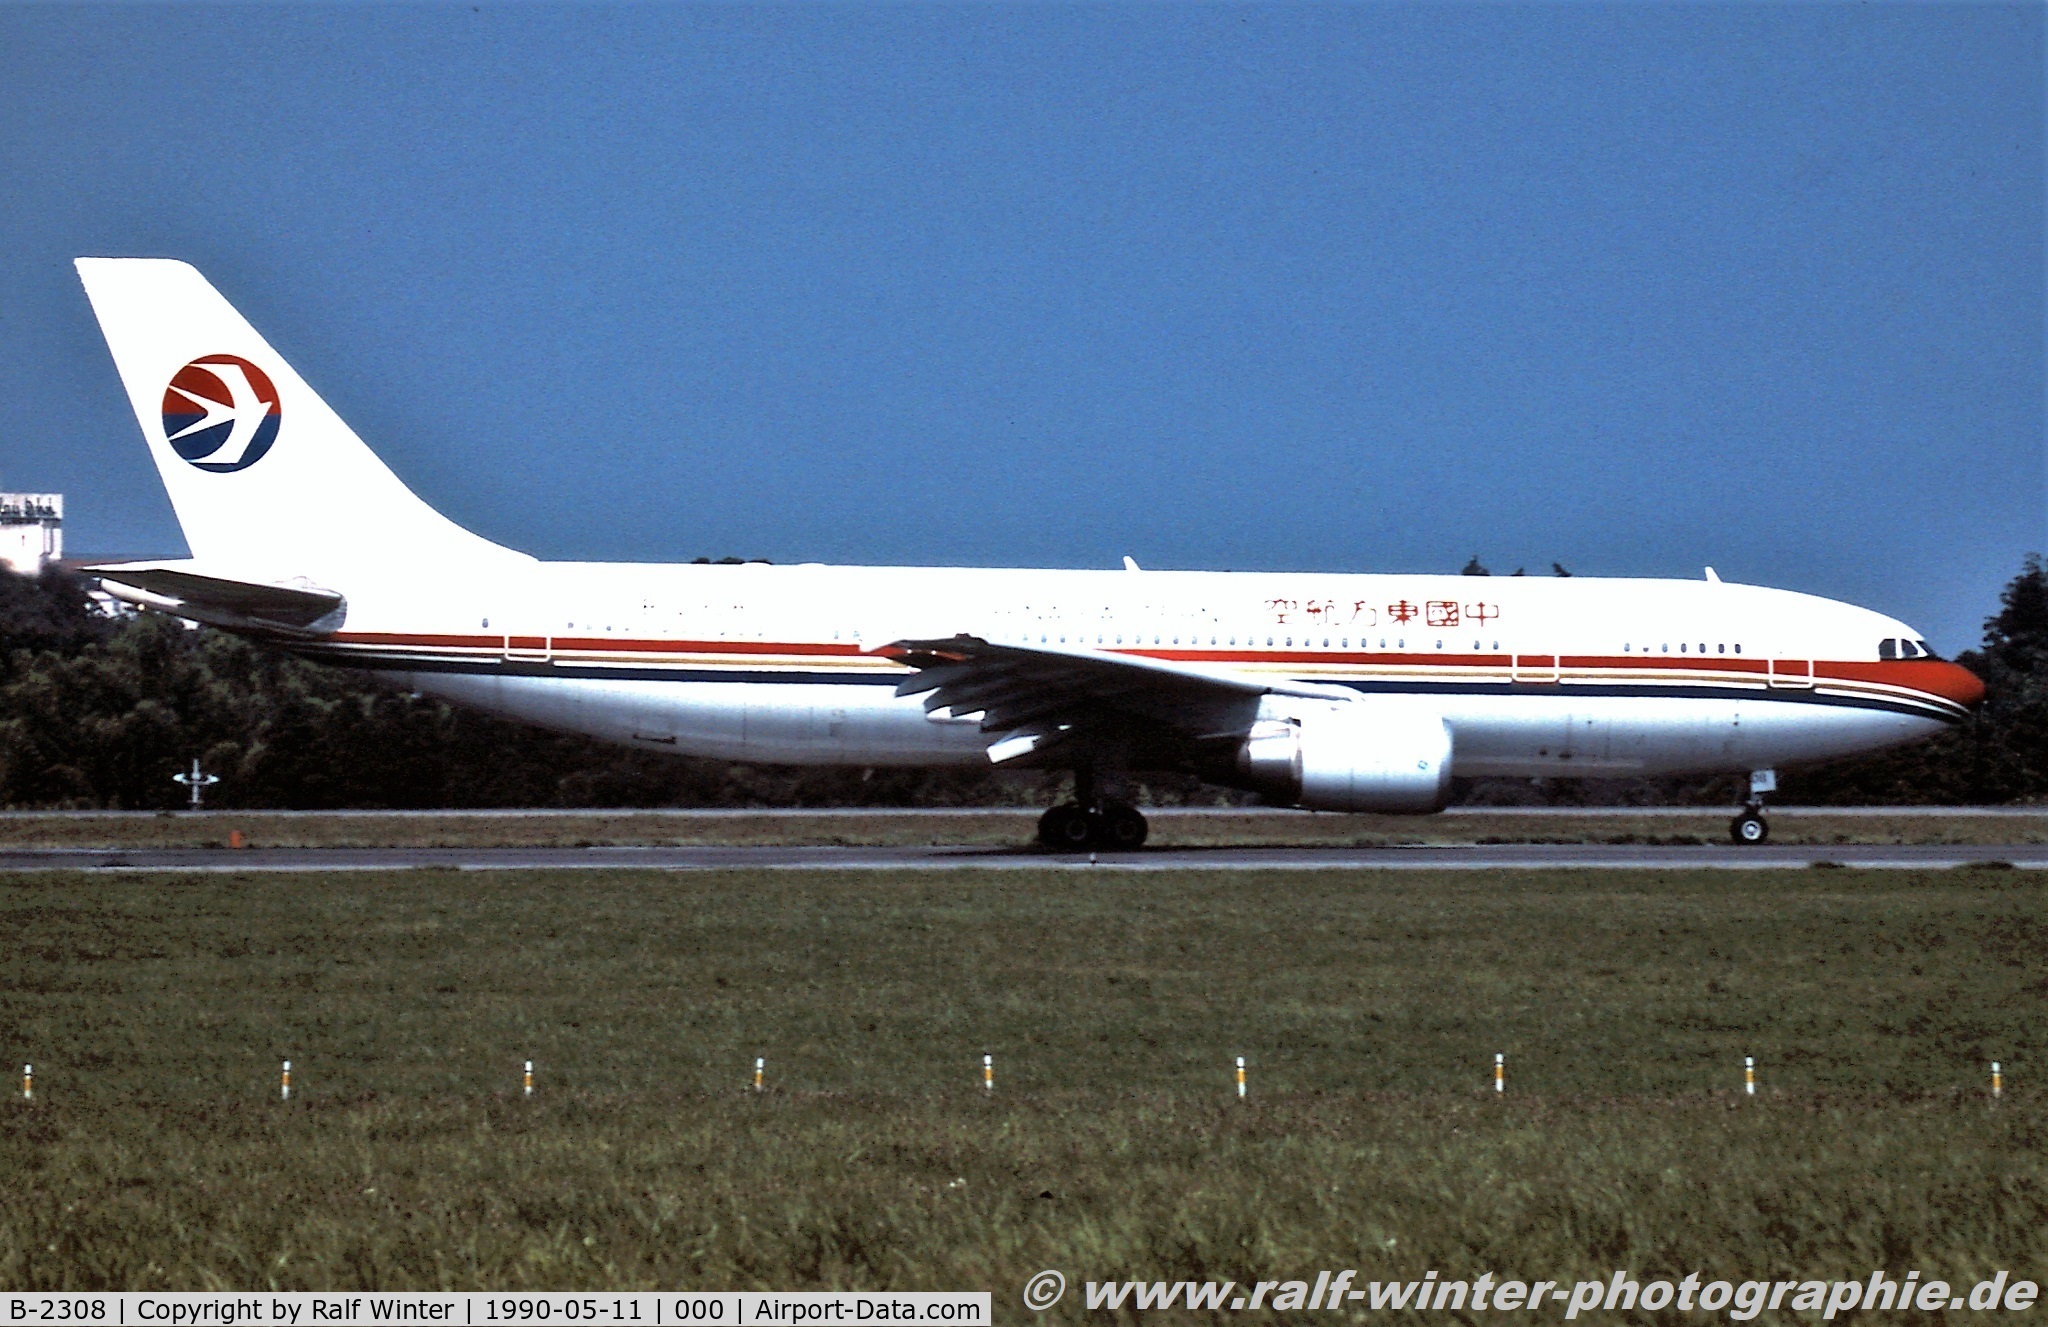 B-2308, 1989 Airbus A300B4-605R(F) C/N 532, Airbus A300B4-605R - China Eastern Airlines - 532 - B-2308 - 1990